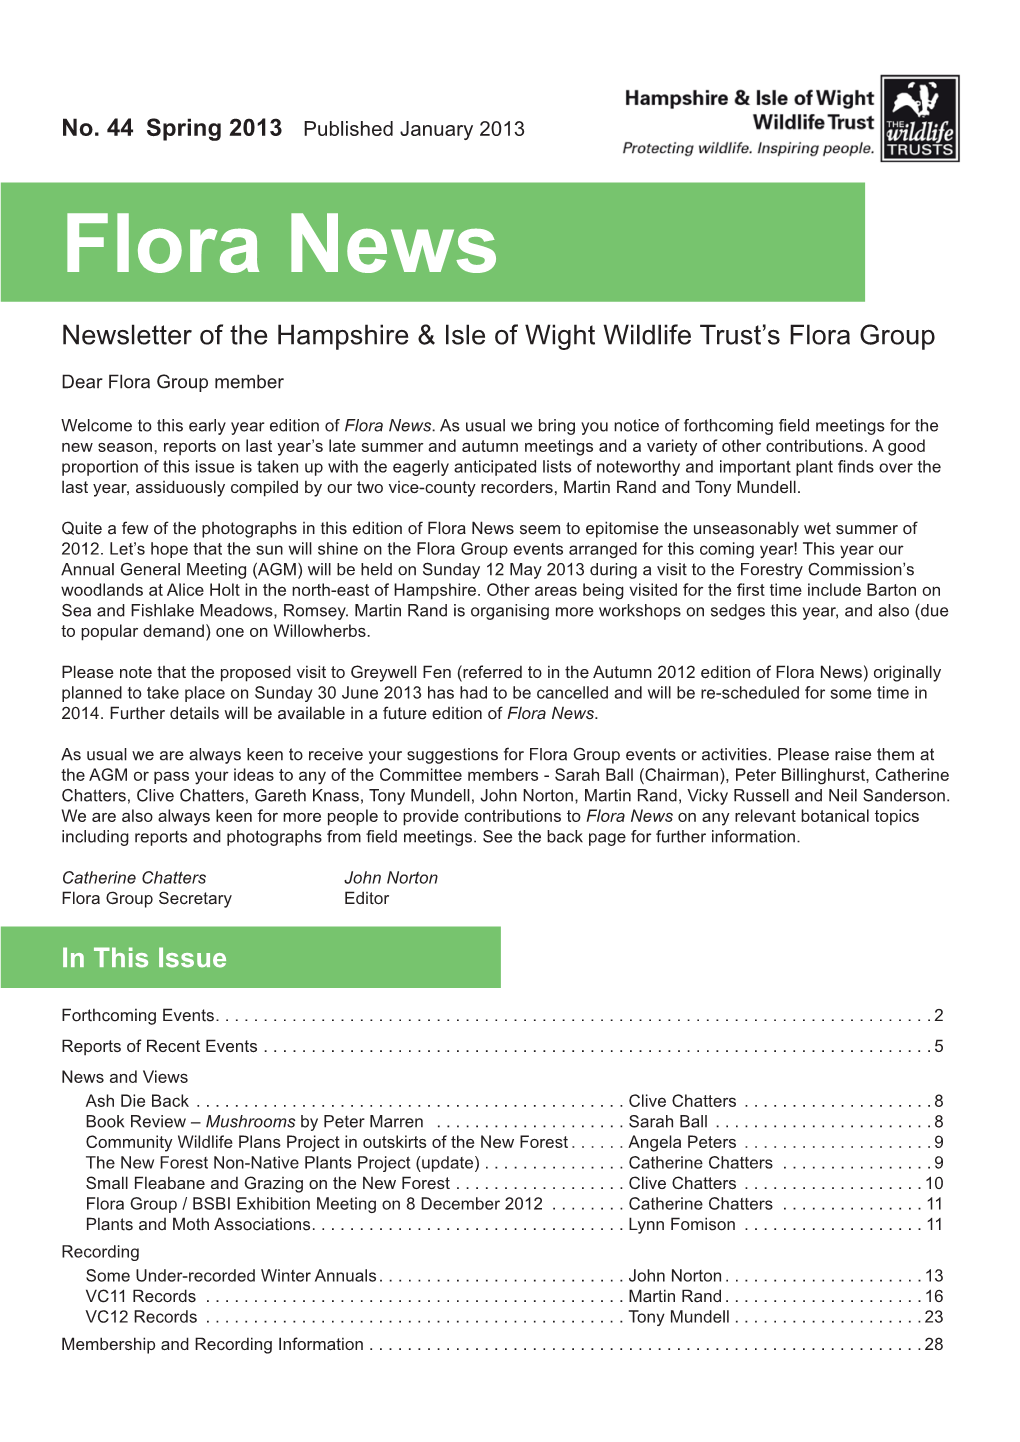 44 Spring 2013 Published January 2013 Flora News Newsletter of the Hampshire & Isle of Wight Wildlife Trust’S Flora Group